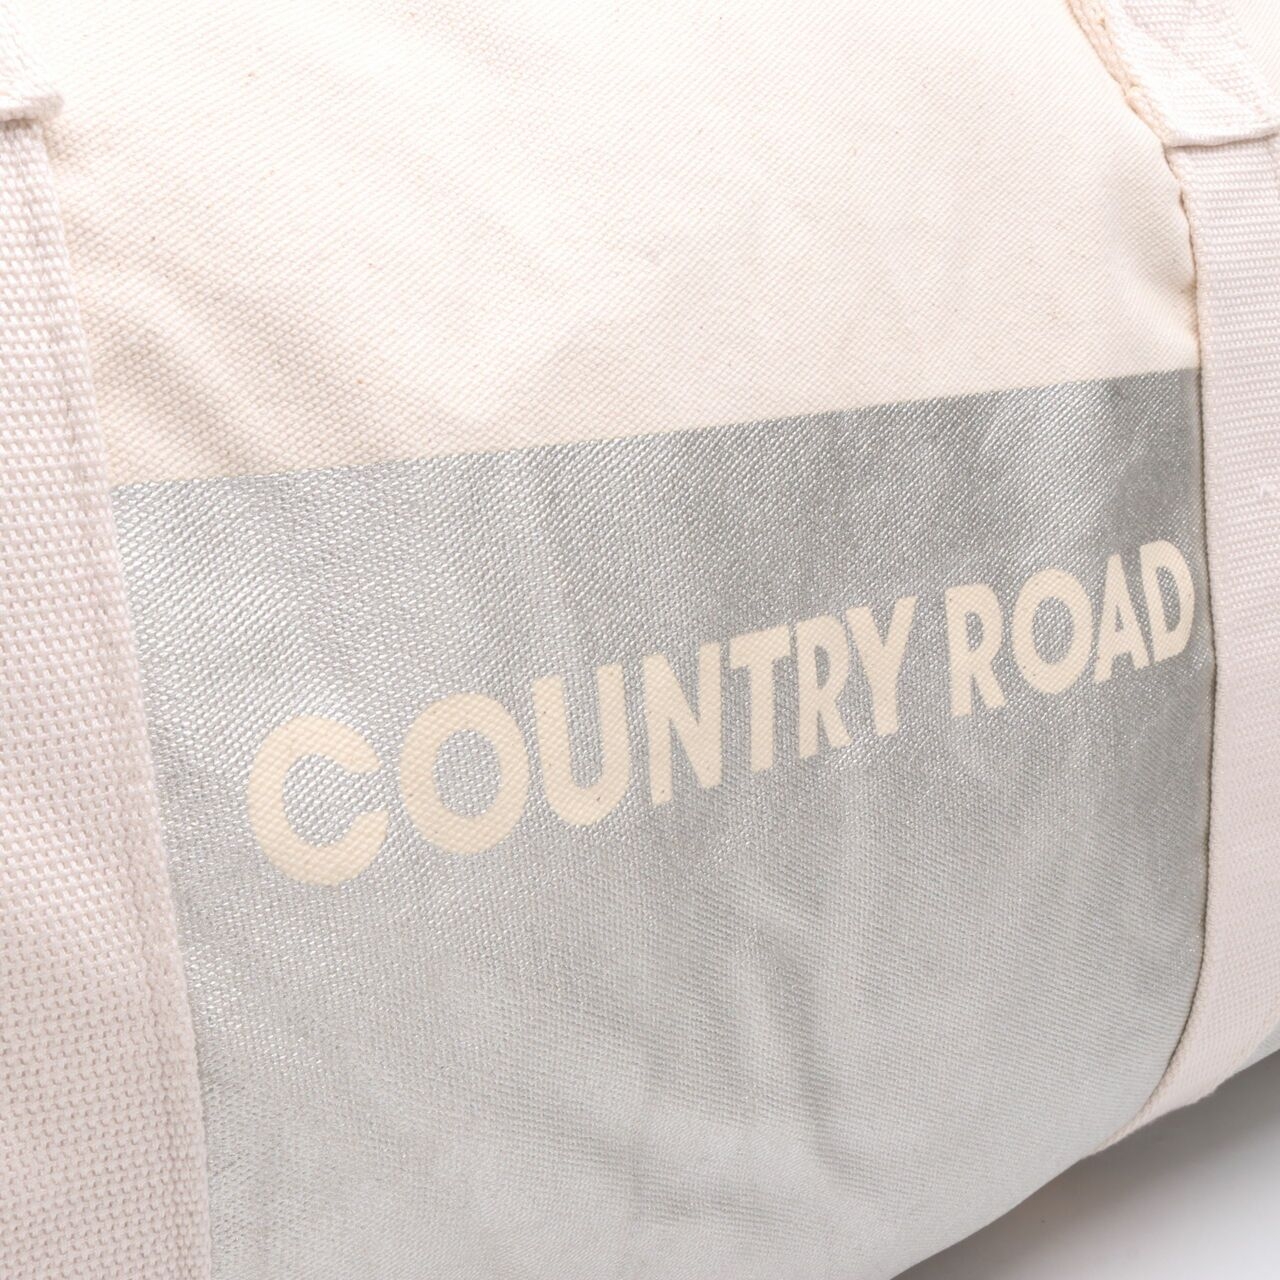 Country Road Cream Luggage and Travel